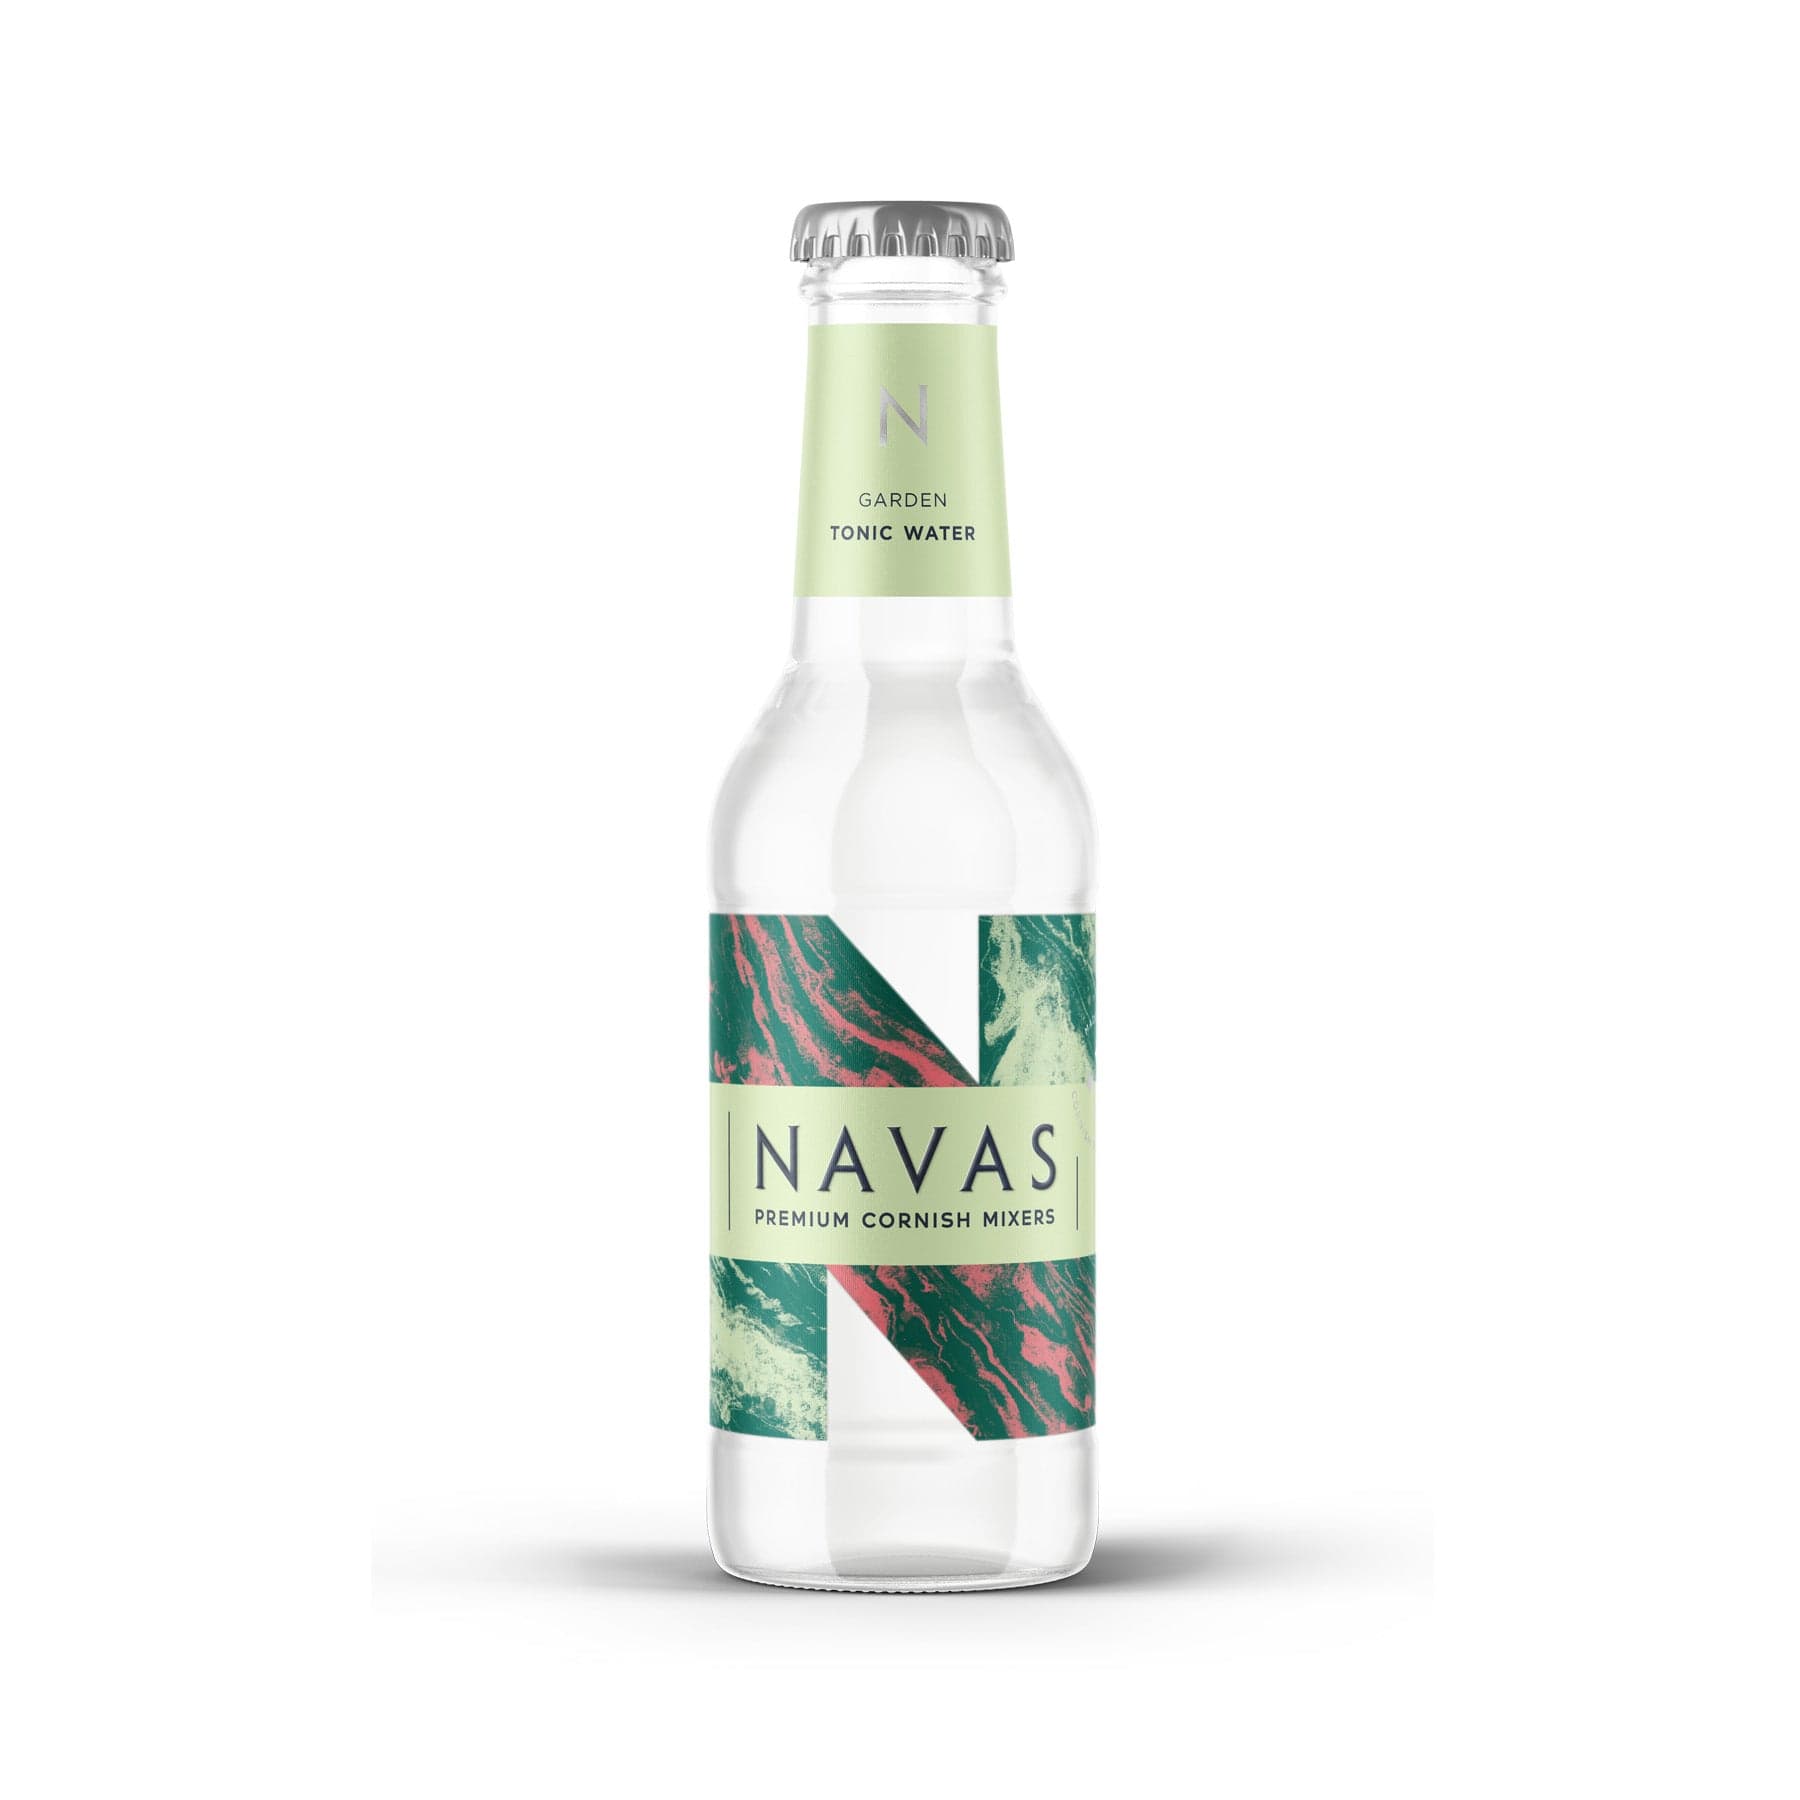 Clear glass bottle of Navas Garden Tonic Water with white and green label, premium Cornish mixers, isolated on white background.